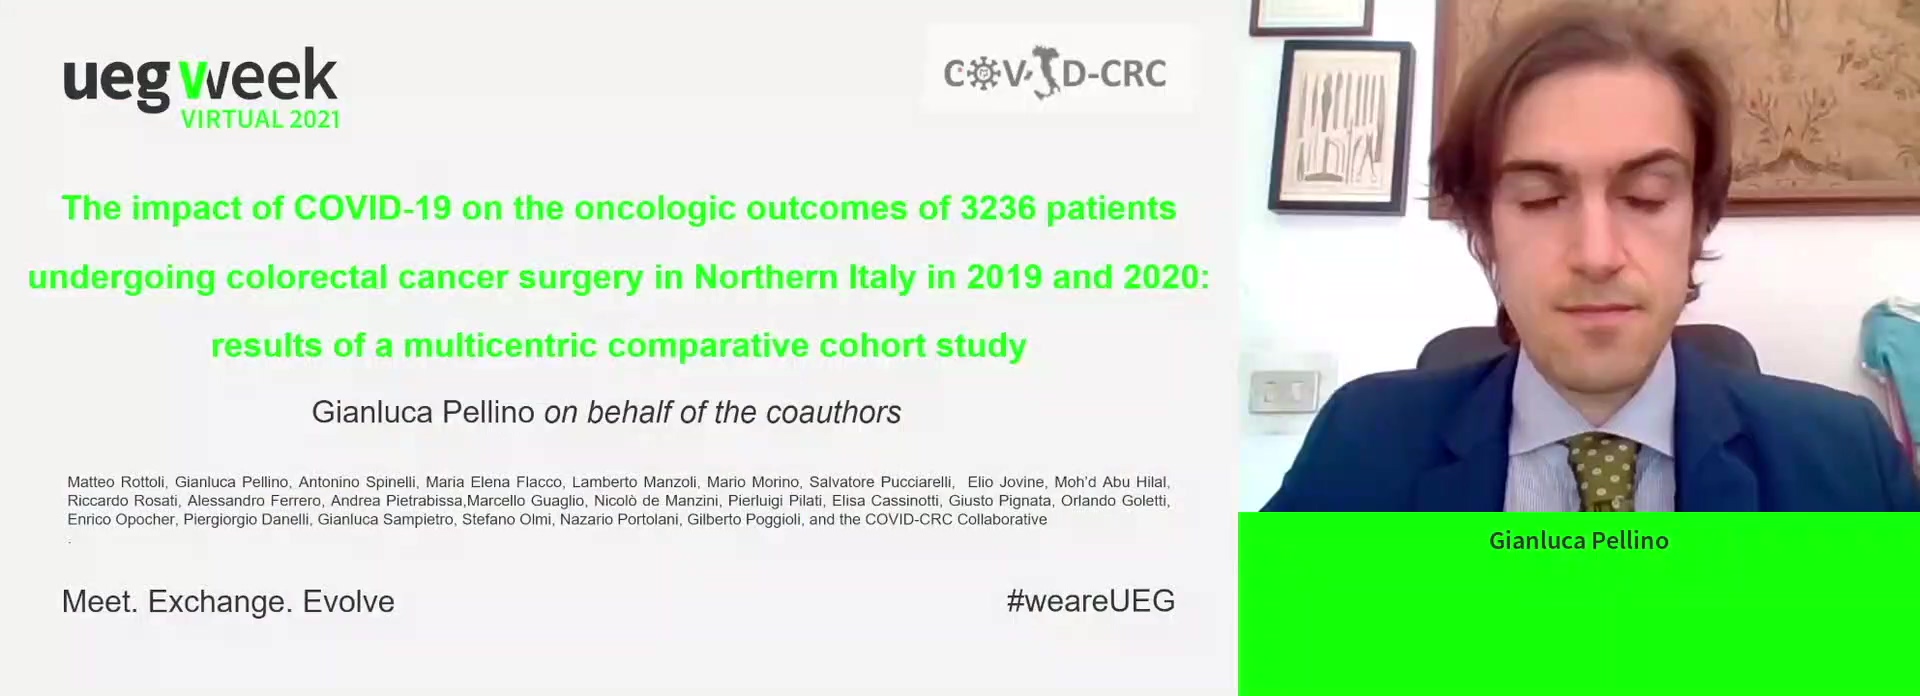 THE IMPACT OF COVID-19 ON THE ONCOLOGIC OUTCOMES OF 3236 PATIENTS UNDERGOING COLORECTAL CANCER SURGERY IN NORTHERN ITALY IN 2019 AND 2020 (COVID-CRC): RESULTS OF A MULTICENTRIC COMPARATIVE COHORT STUDY.